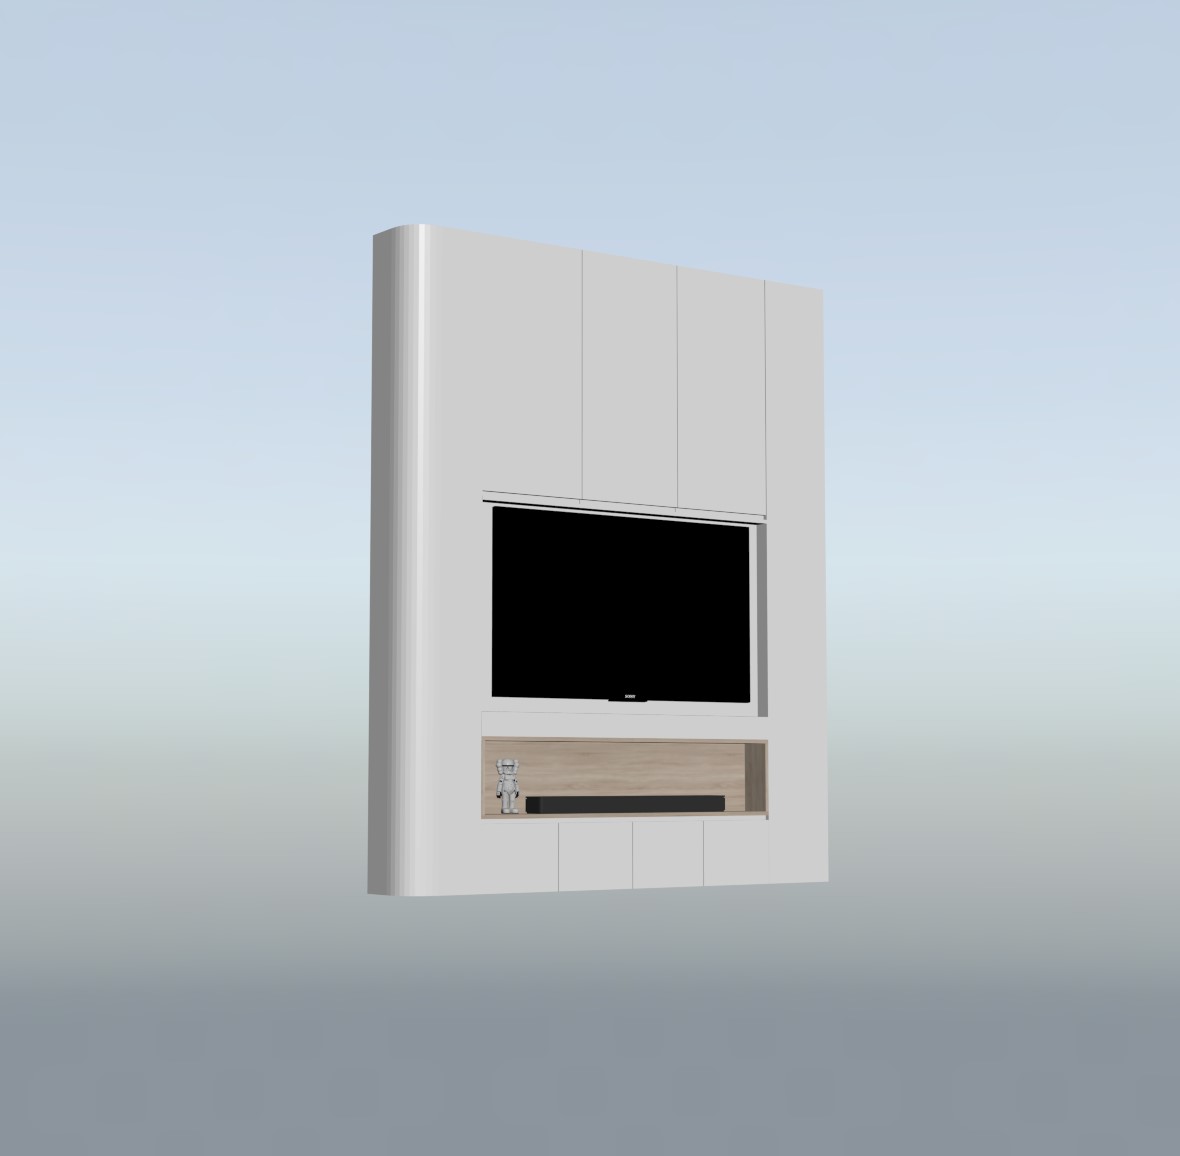 9778. 3D Wall TV Model For Free Download by An Ngoc